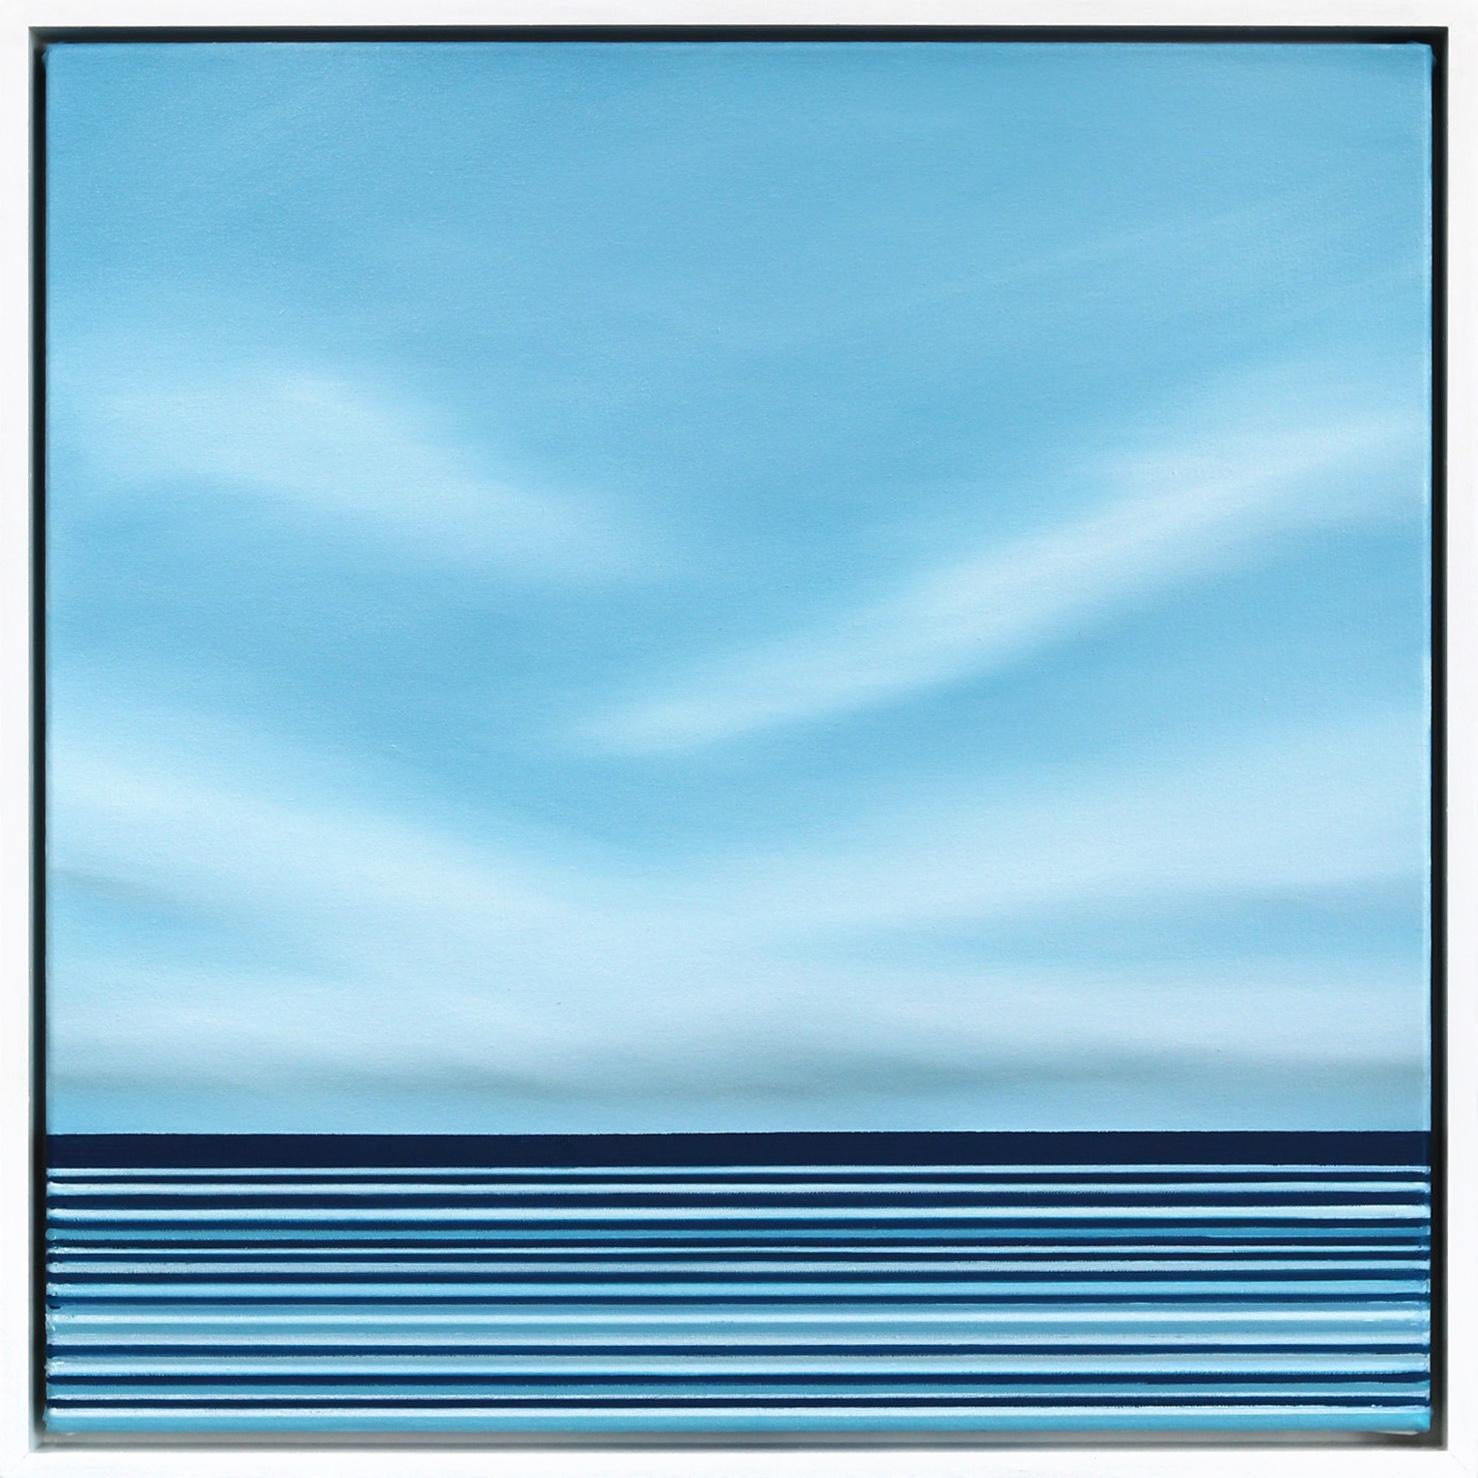 Jeremy  Prim Abstract Painting - Untitled No. 704 - Framed Contemporary Ocean Sky Minimalist Blue Artwork